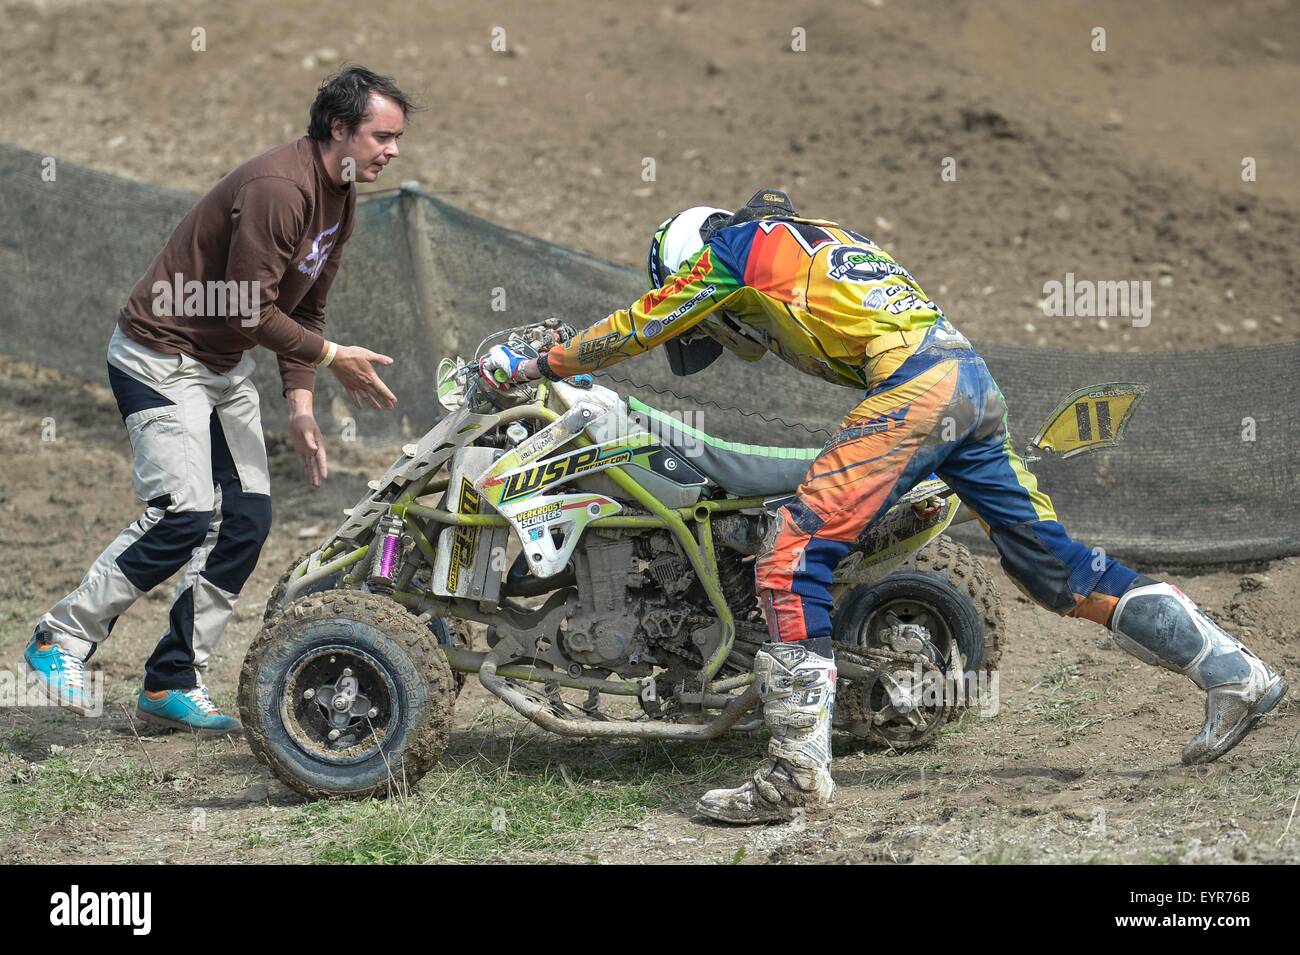 North-Eastern Estonia. 2nd Aug, 2015. Keeping the second position in ITP Quadrocross European Championship standings Dutch racer Mike Van Grinsven loses the wheel during the first race at the 5th round of championship, which was held at Kivioli Motocross Track in North-Eastern Estonia, on Aug. 2, 2015. Credit:  Sergei Stepanov/Xinhua/Alamy Live News Stock Photo